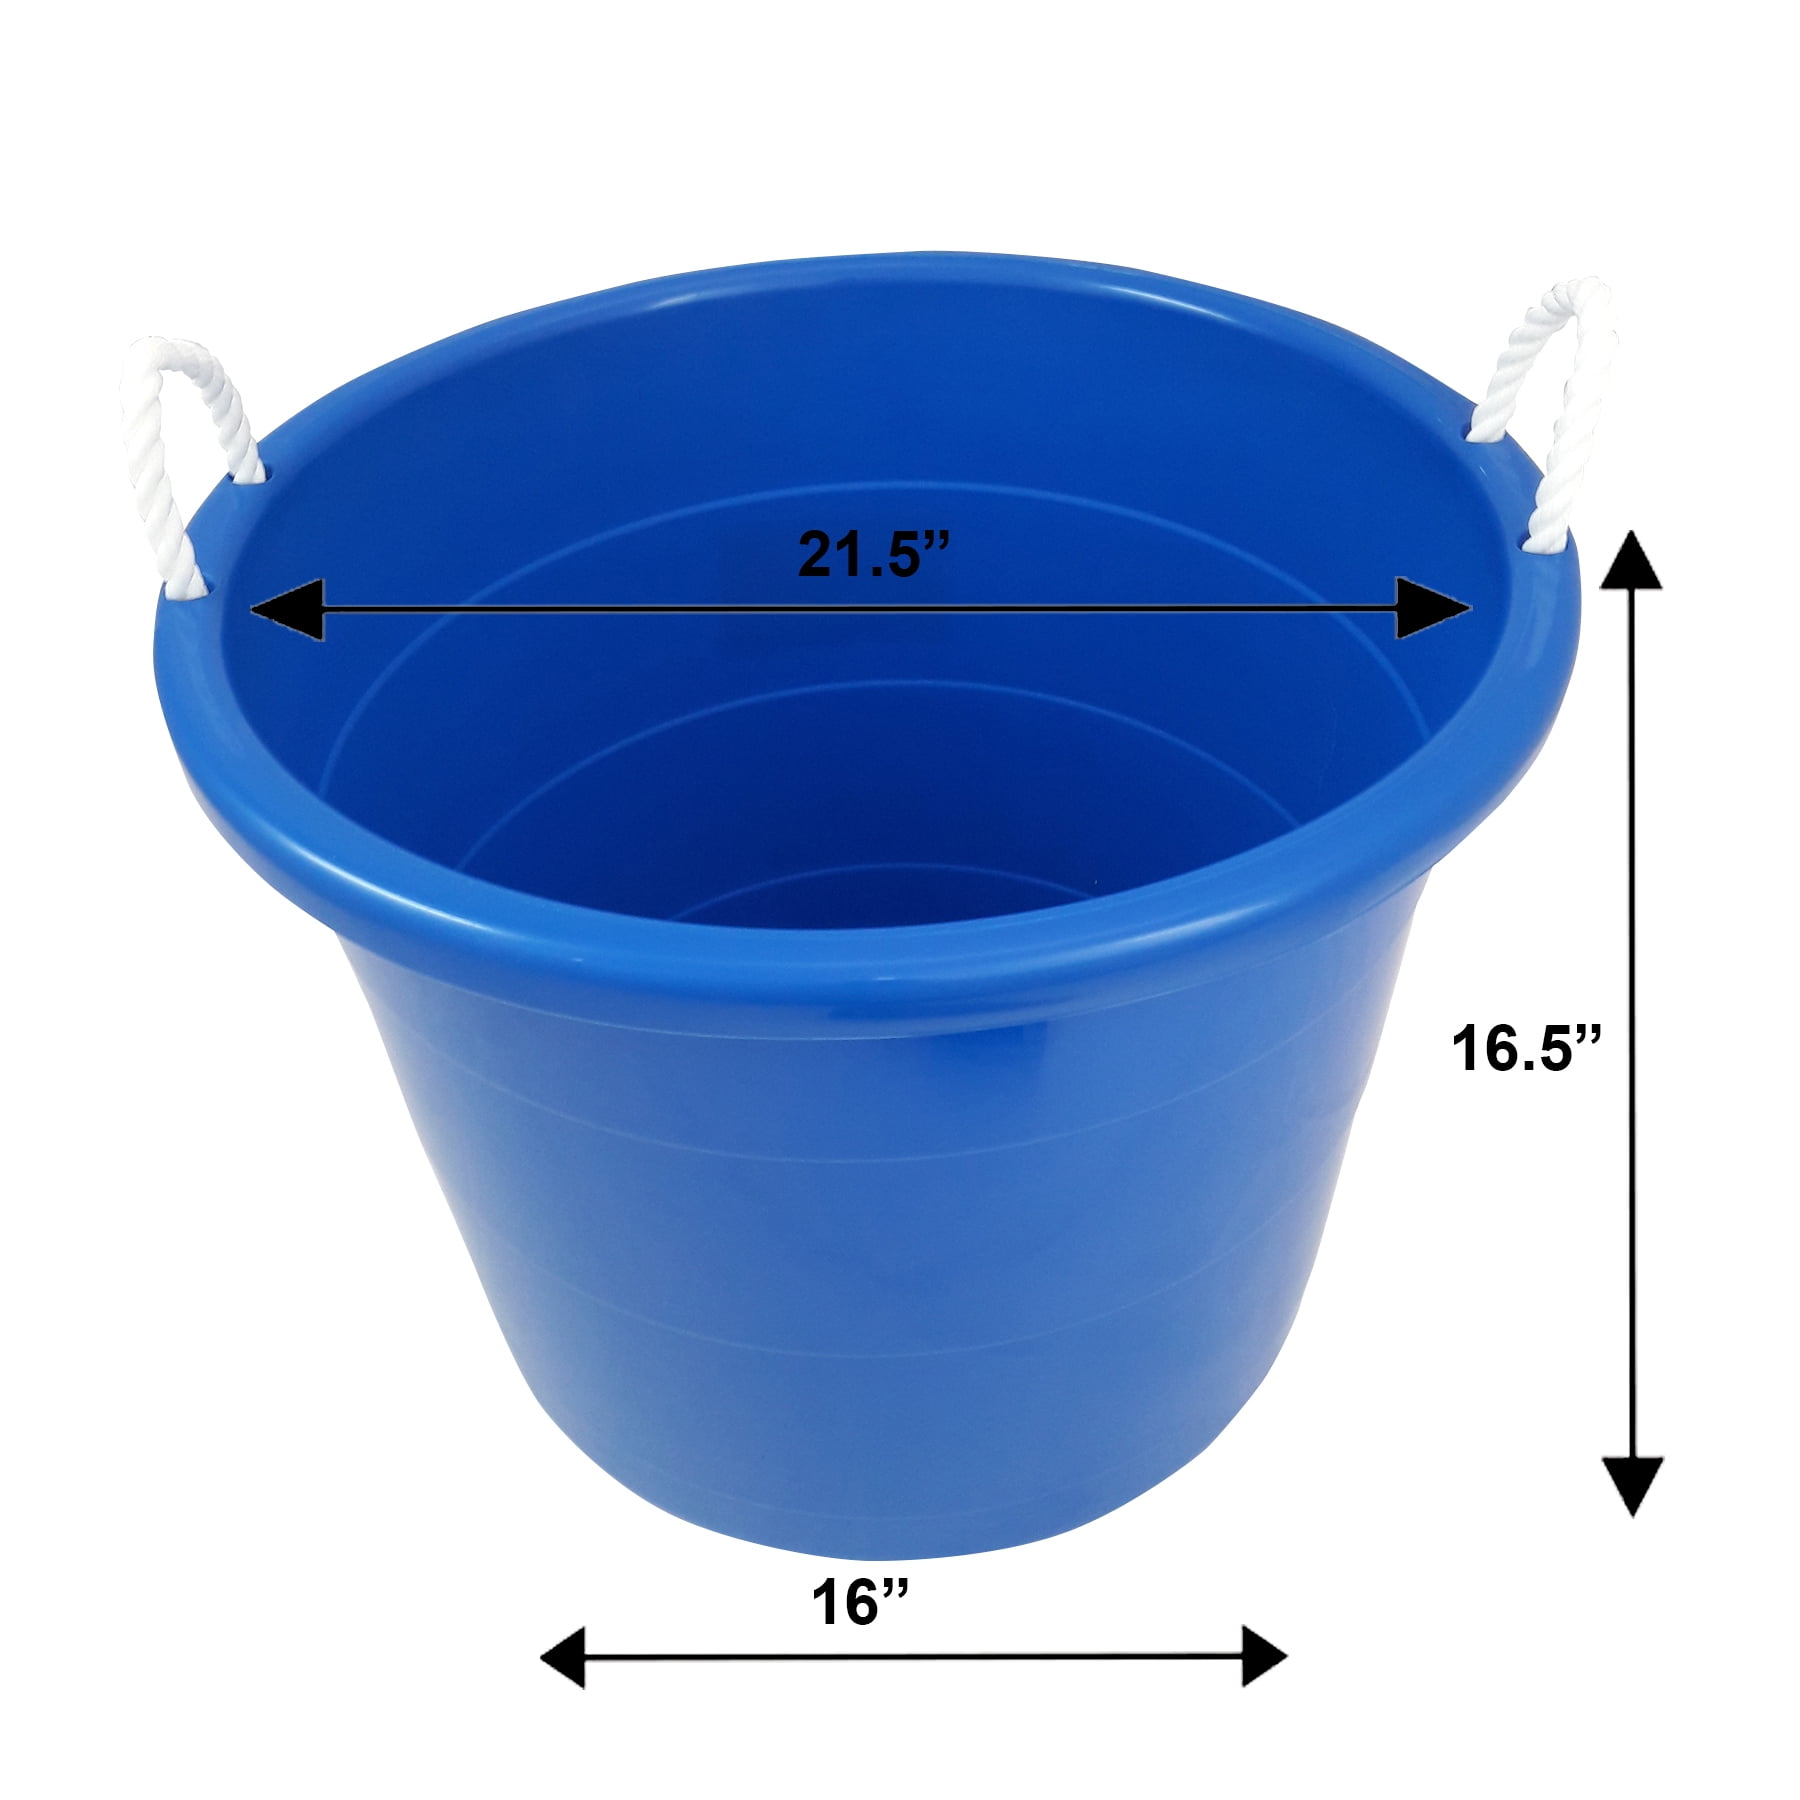 2022-07-24. Homz Plastic Utility Tub with Rope outdoor plastic tub. iphone ...